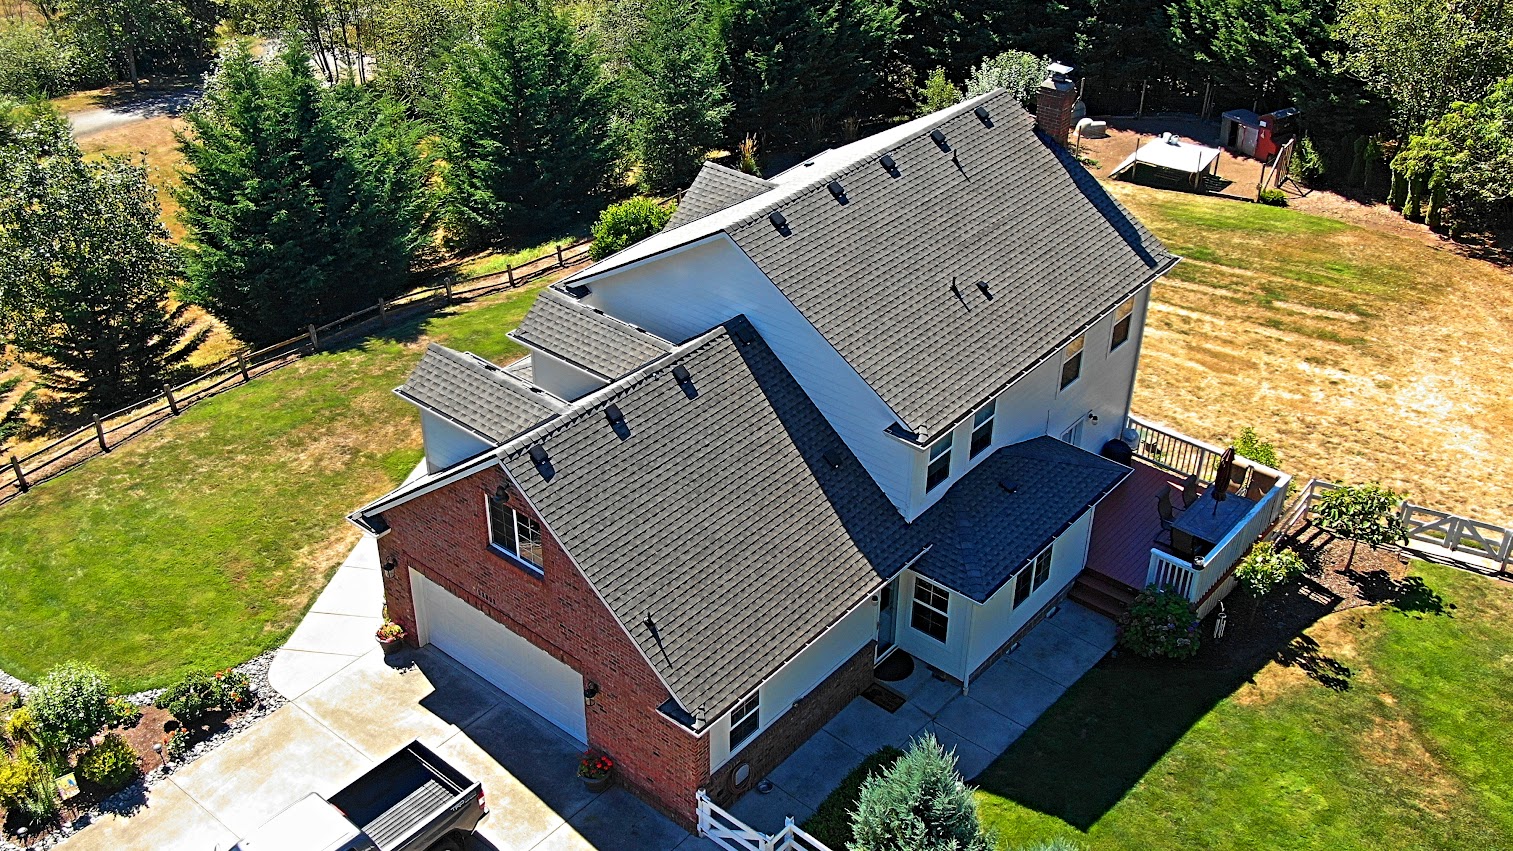 Top view of the house with gray roof